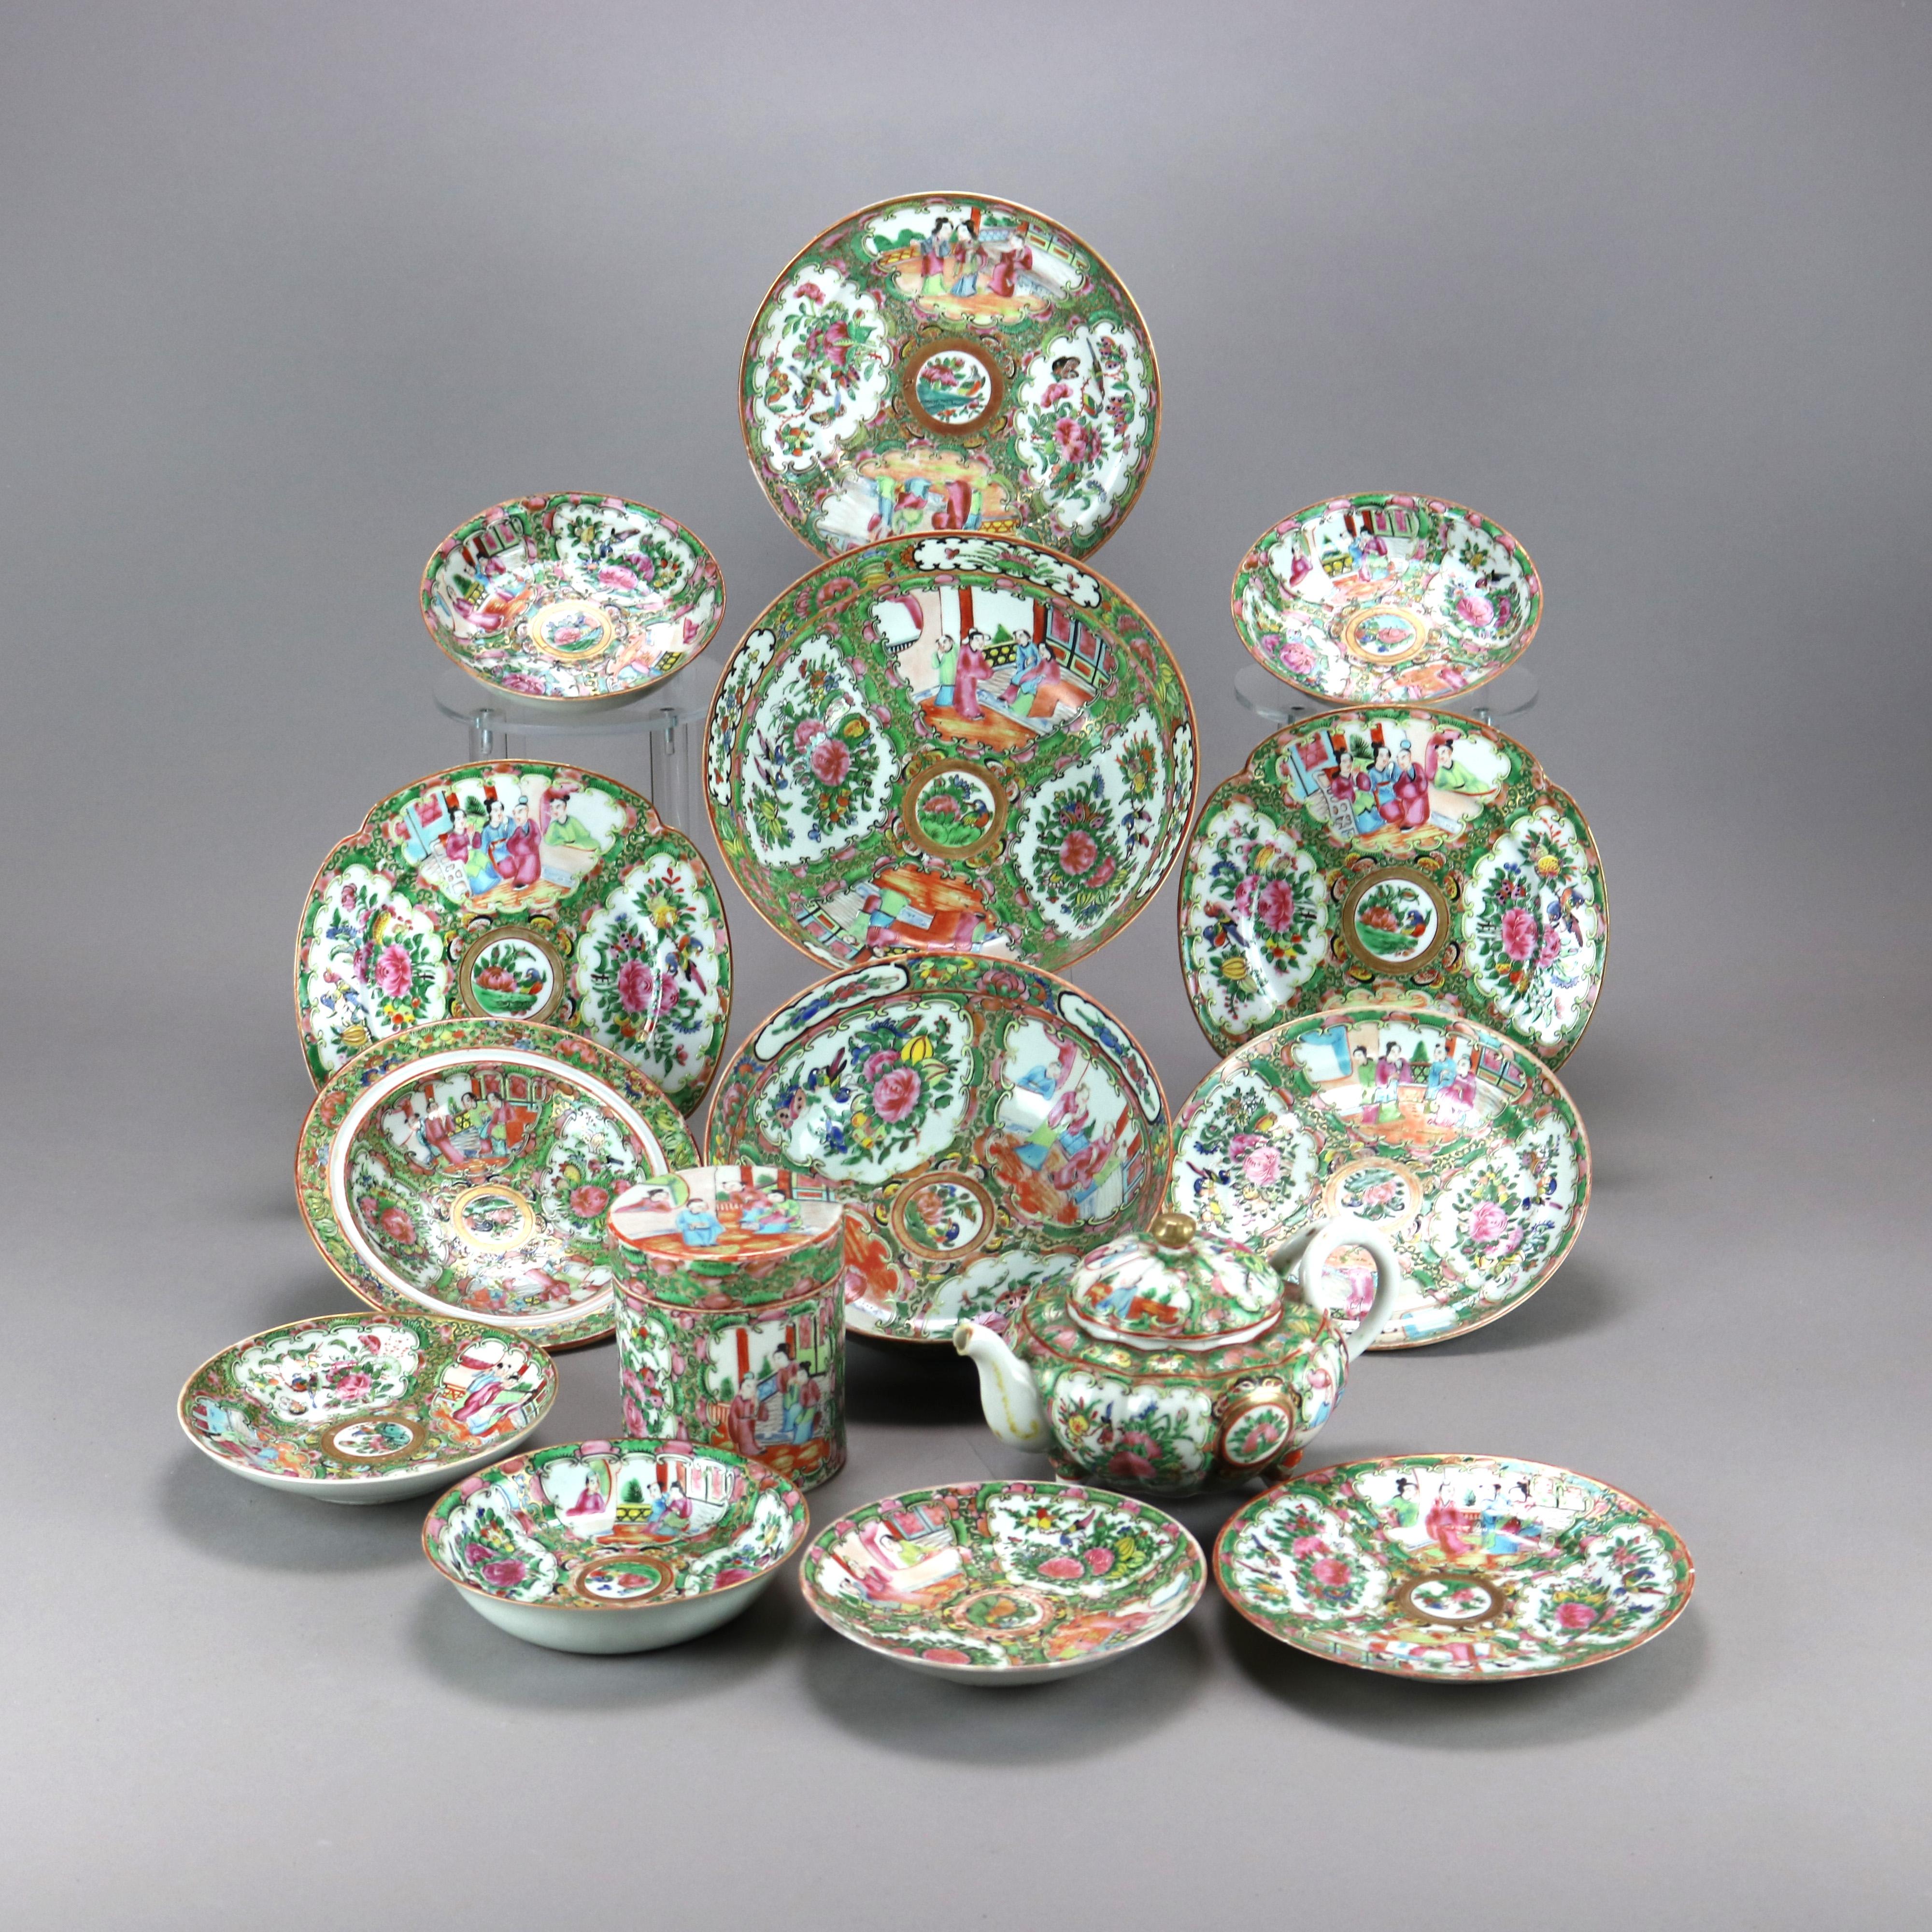 An antique grouping of fifteen Chinese Rose Medallion porcelain dining items offer reserves of genre and garden scenes and include plates, bowls, tea caddy and teapot as outlined below, circa 1900

Measure - 3 soup bowls 6''H x 6''W x 1.5''D; 2